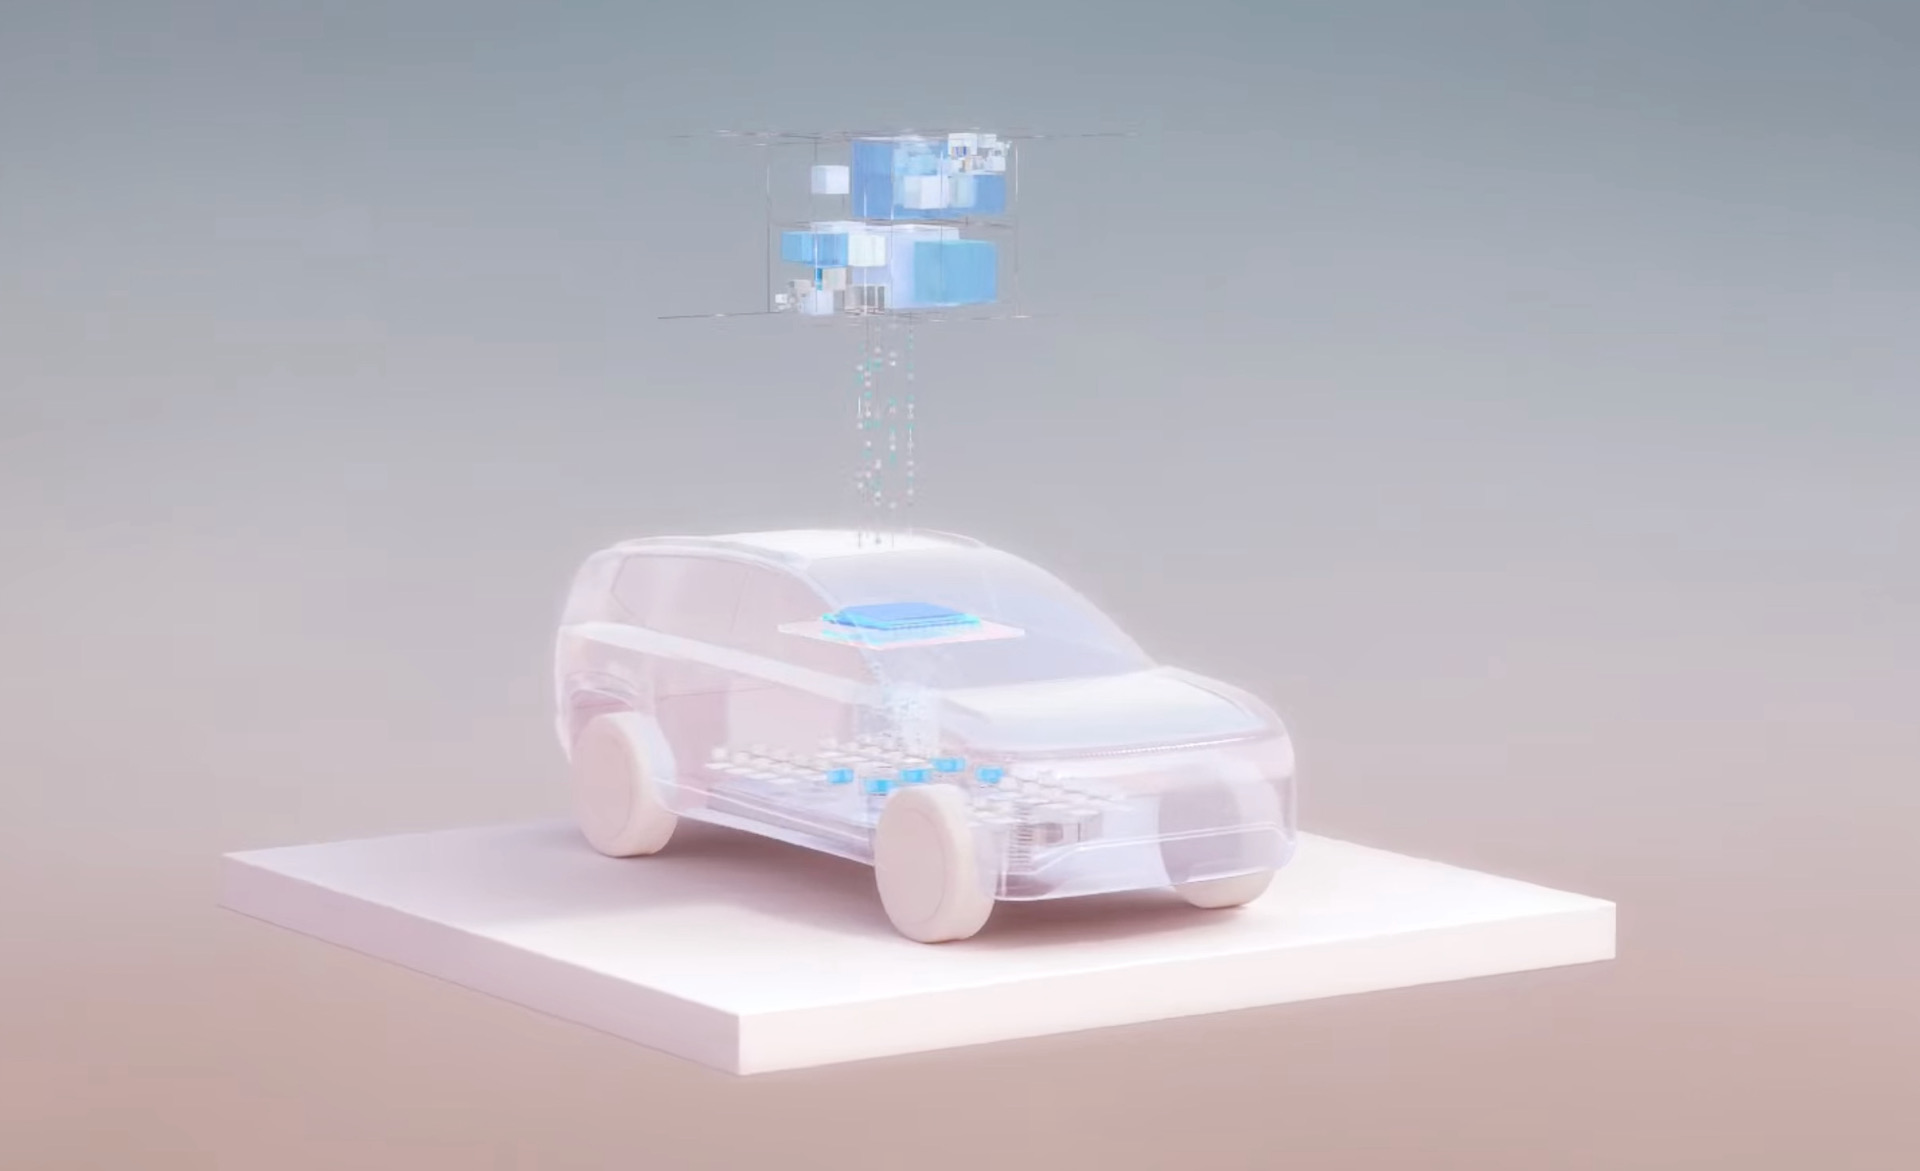 Hyundai Motor Group outlines ‘Software Defined Vehicle’ future (video)